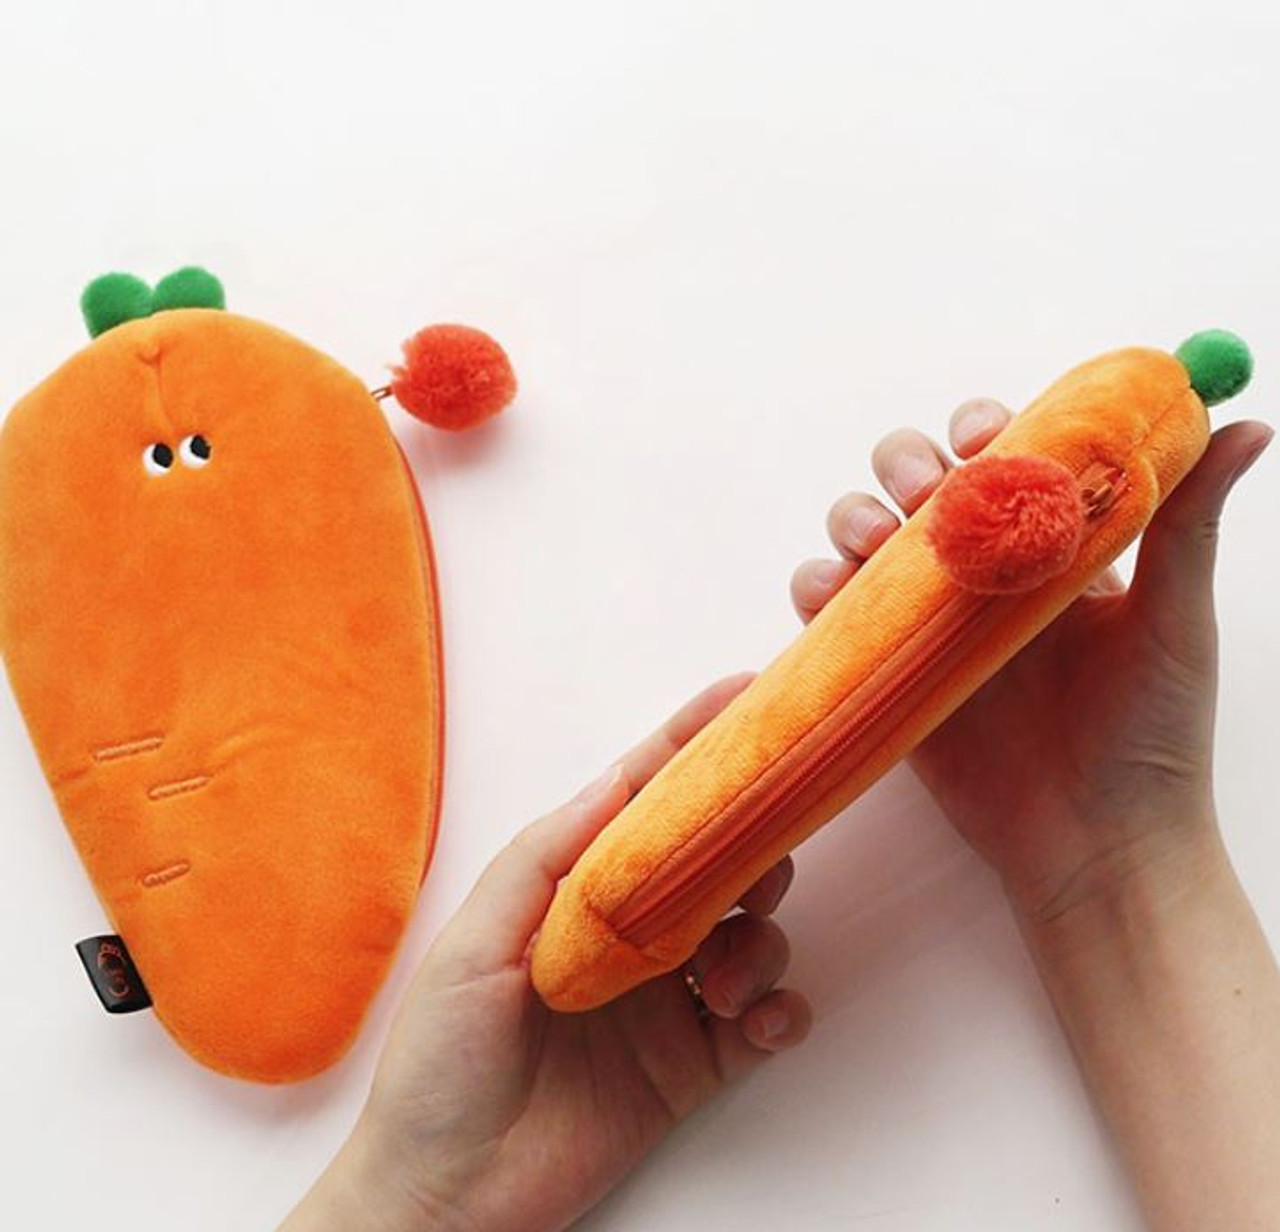 Is That The New 1pc Random Carrot Pencil Bag ??